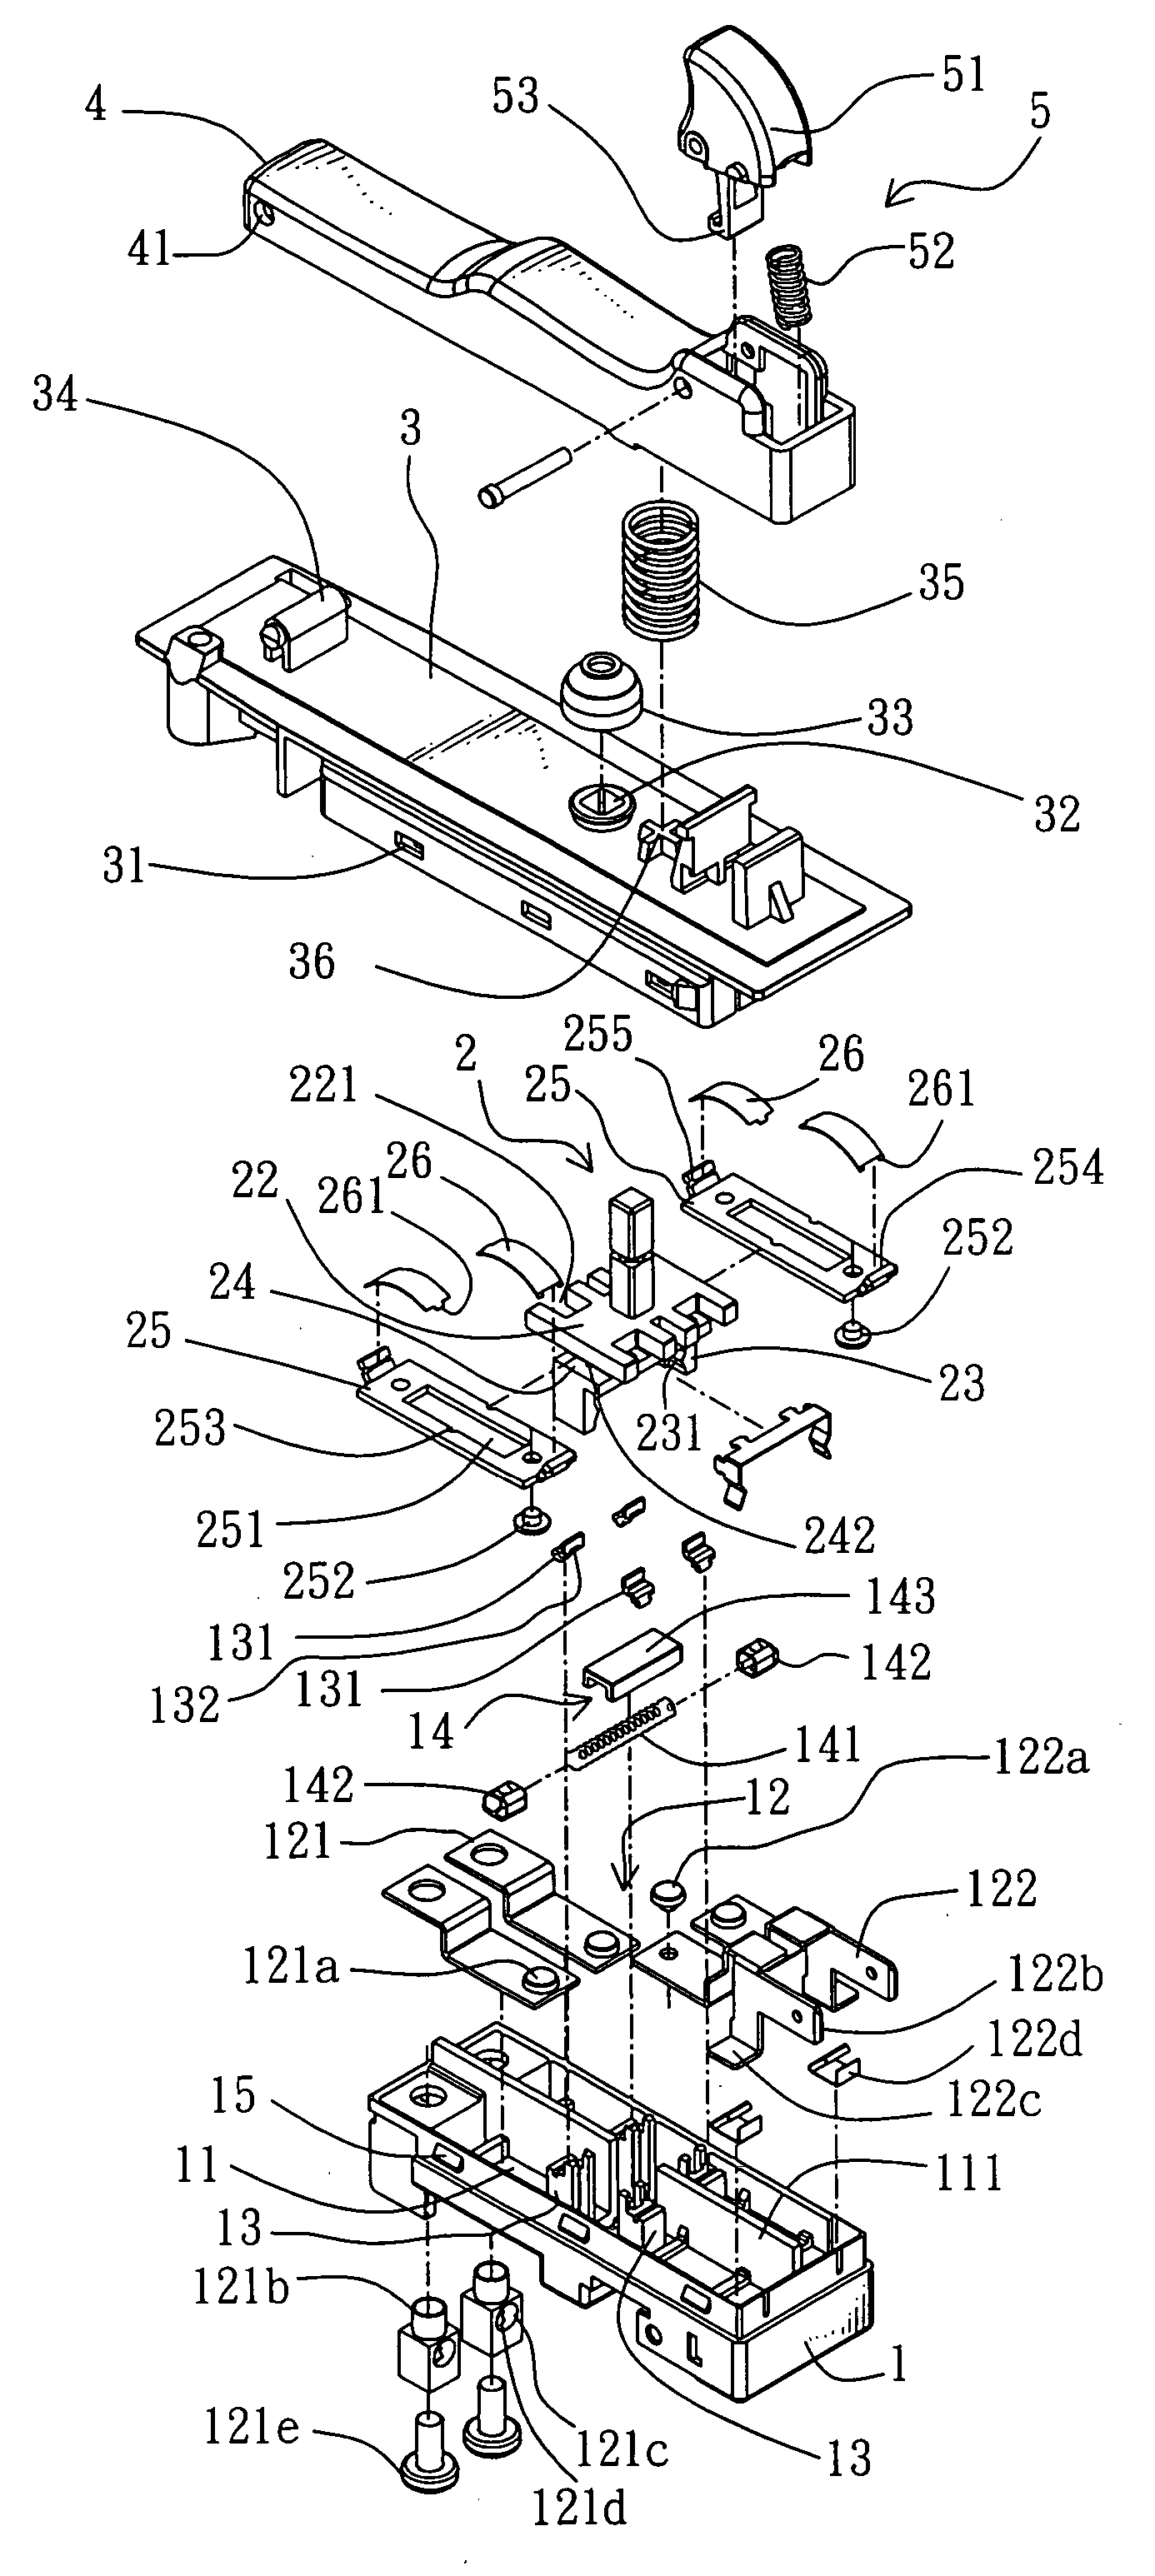 Press switch having a force-to-detach function